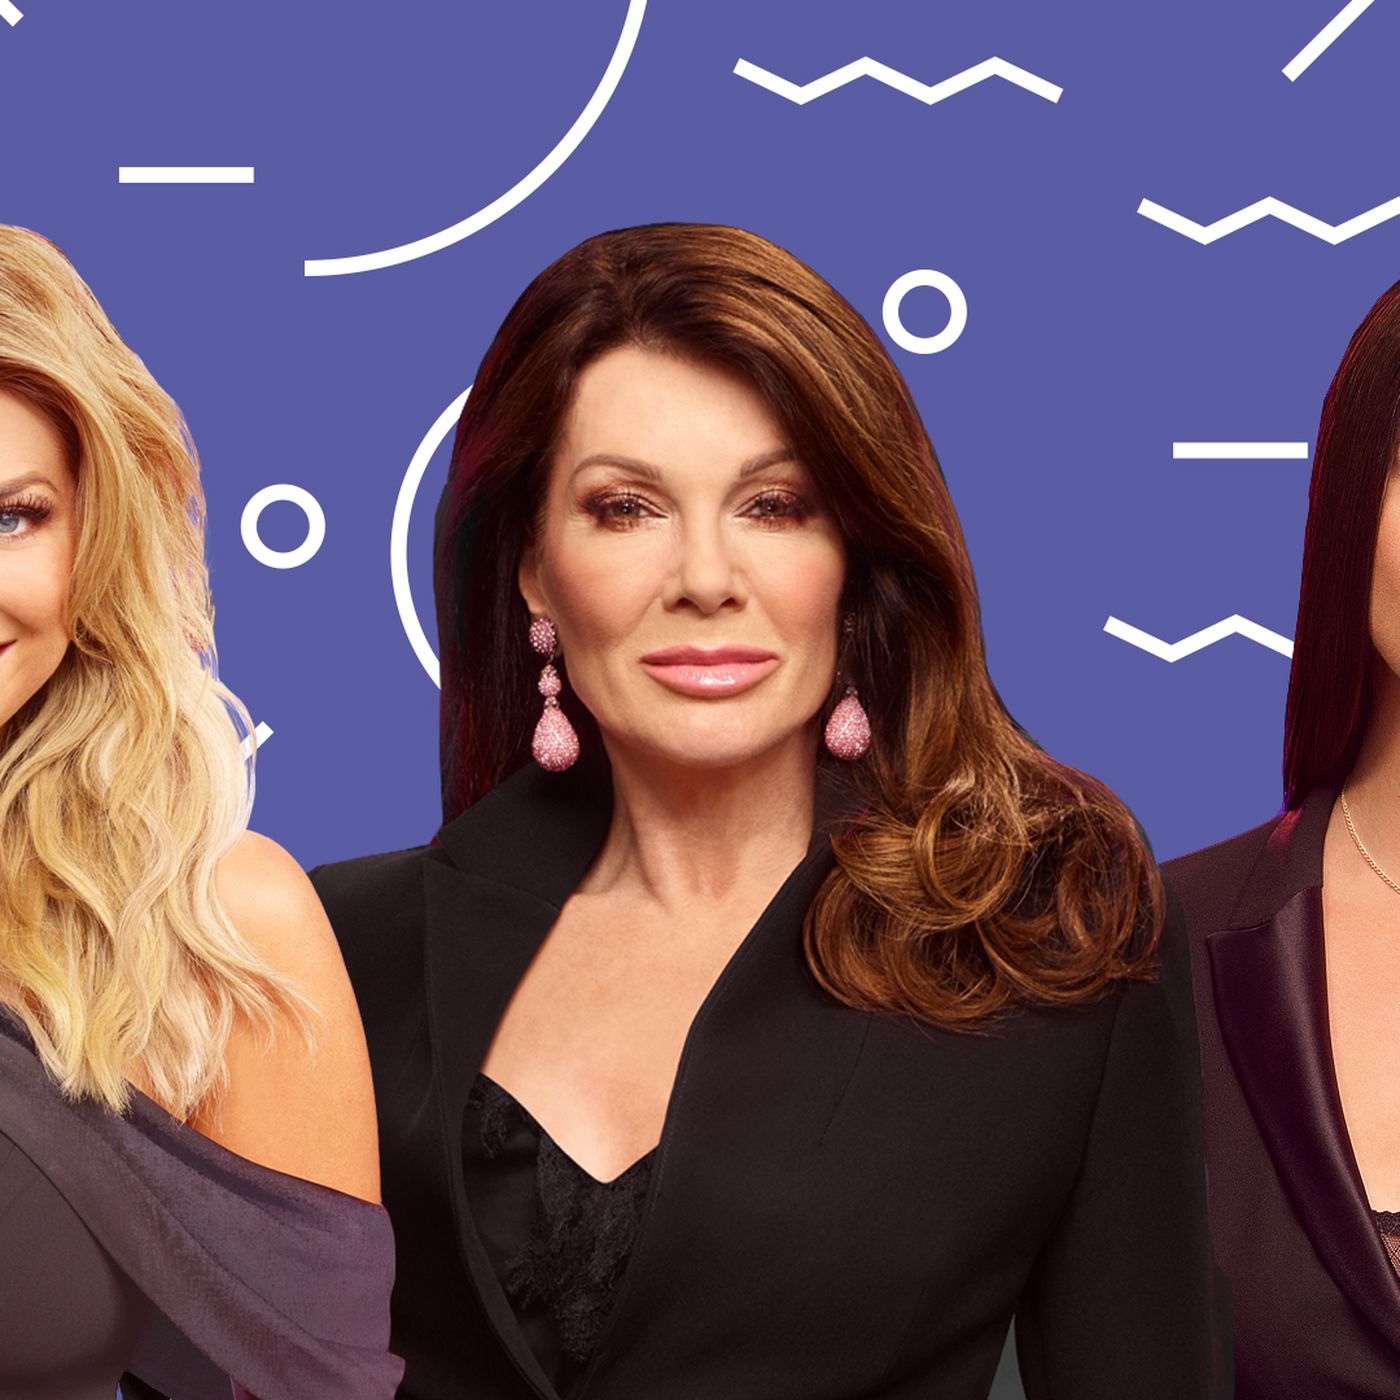 Why the cast of Vanderpump Rules will sell you anything - Vox